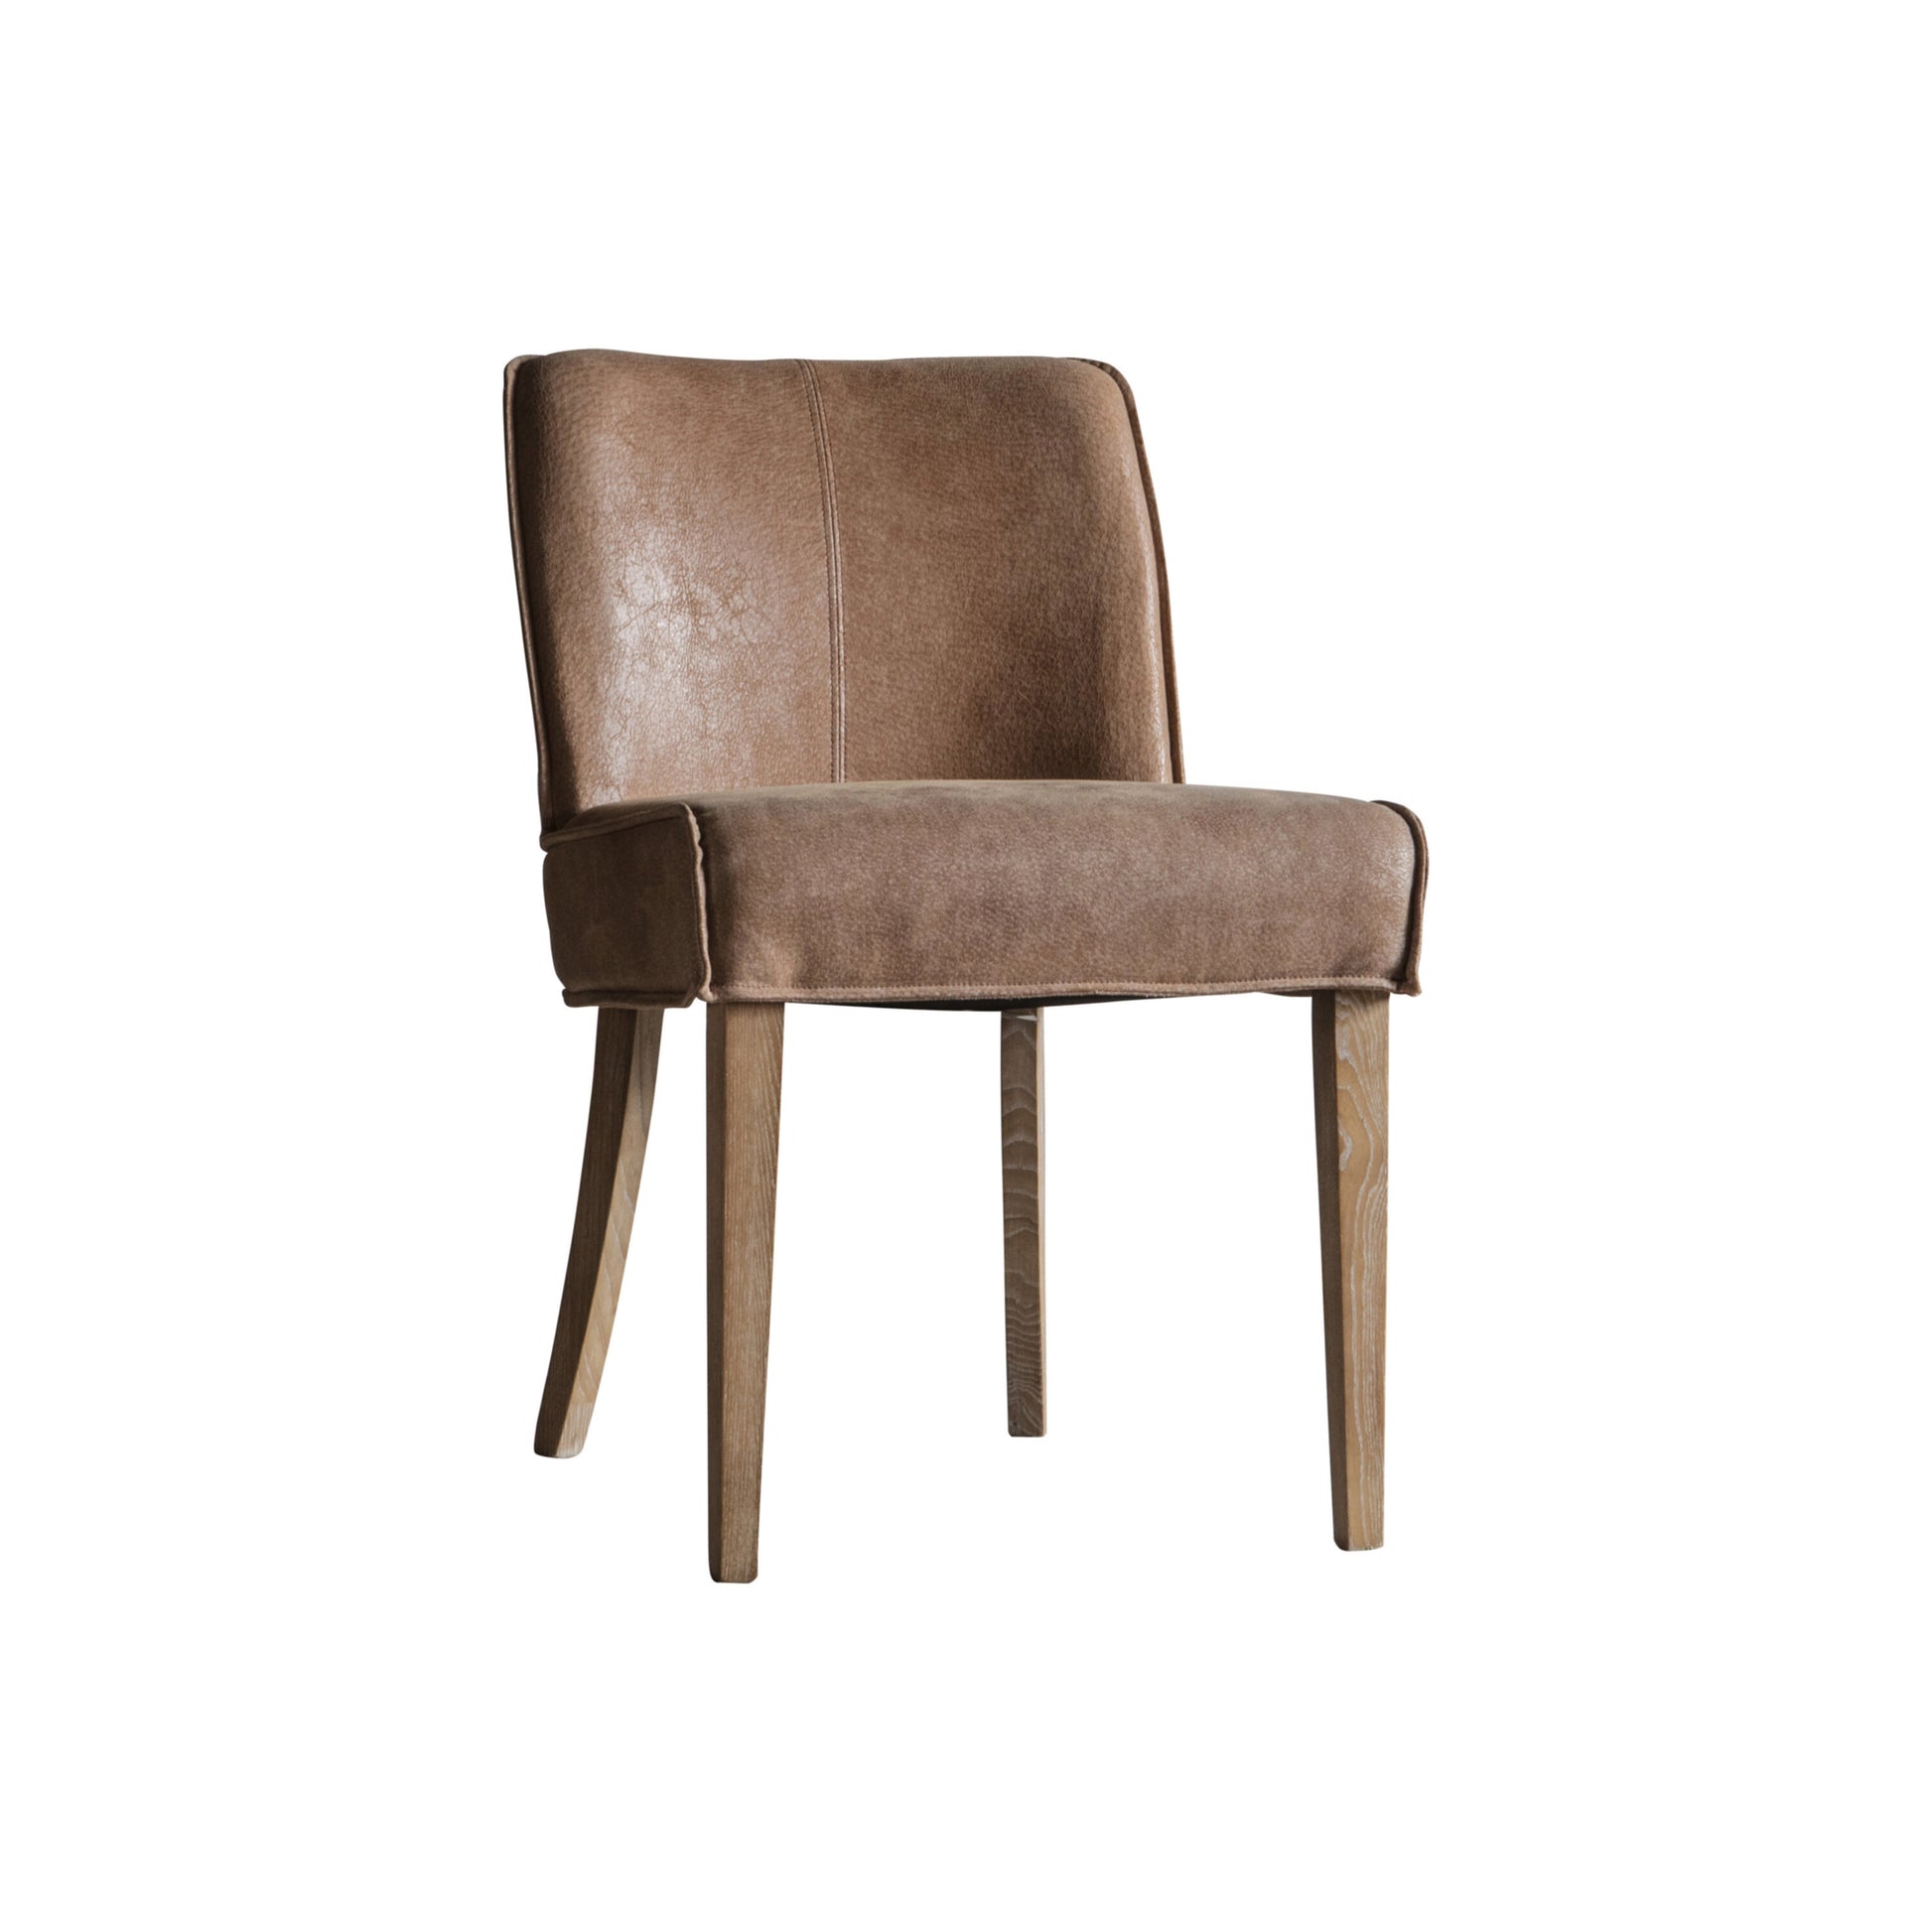 Tarnby Chair | Brown Leather (2 Pack)